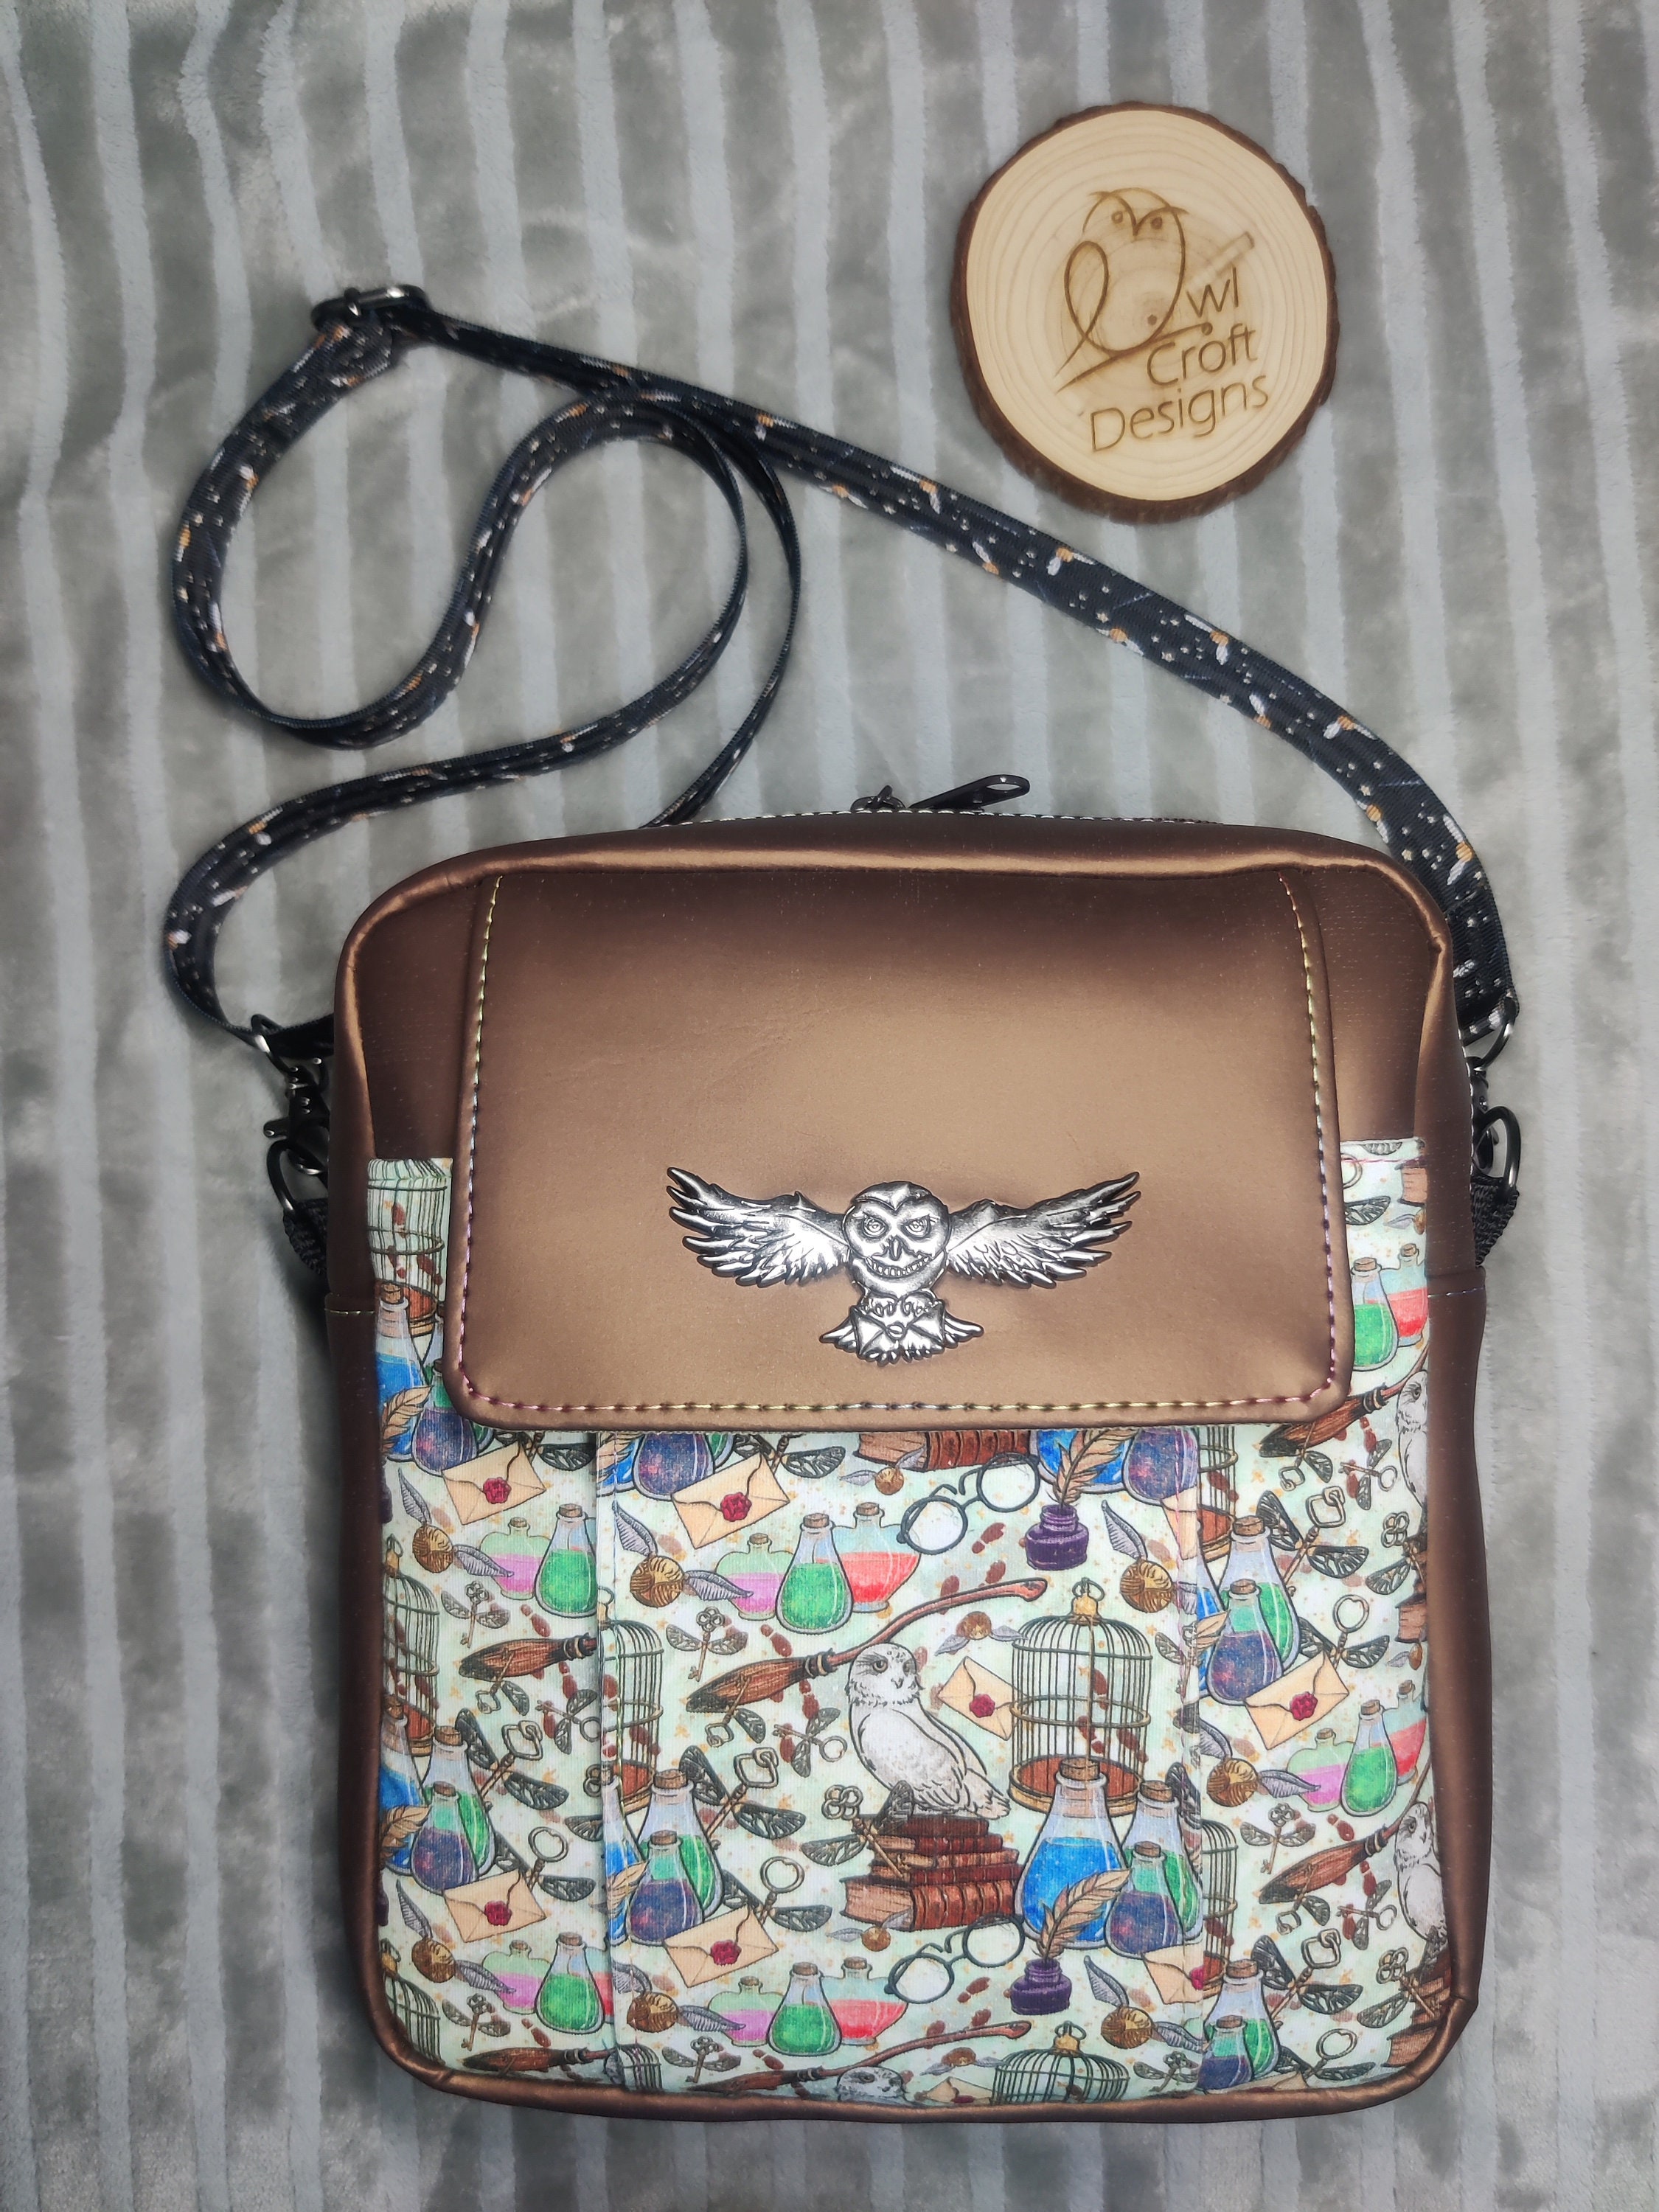 Loungefly Brown Faux Leather Owl Coin Purse Small Wallet